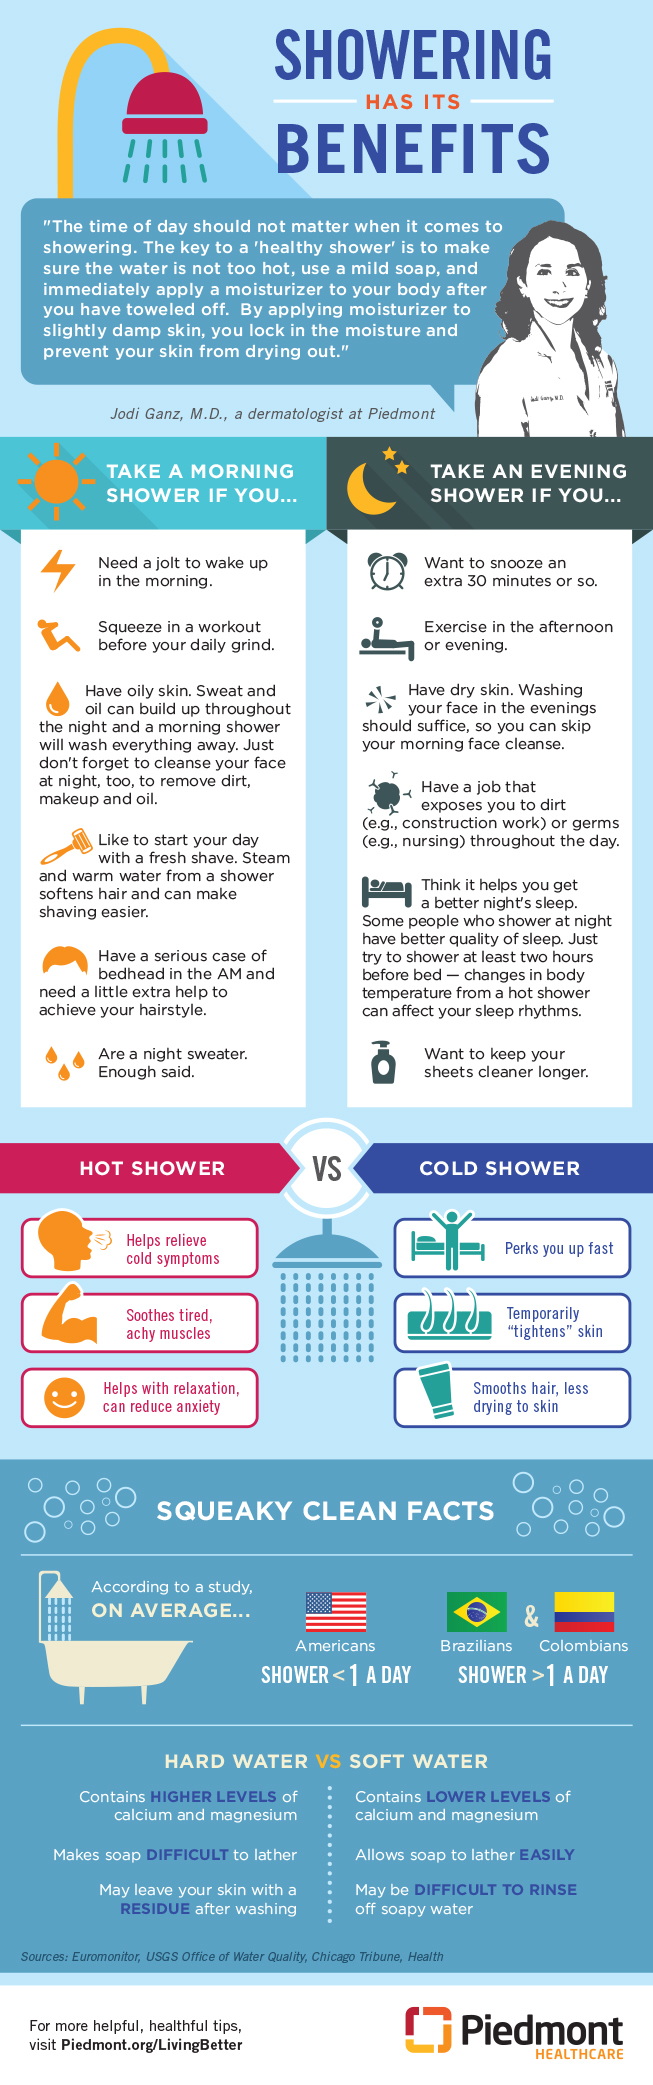 Showering has its health benefits graphic.